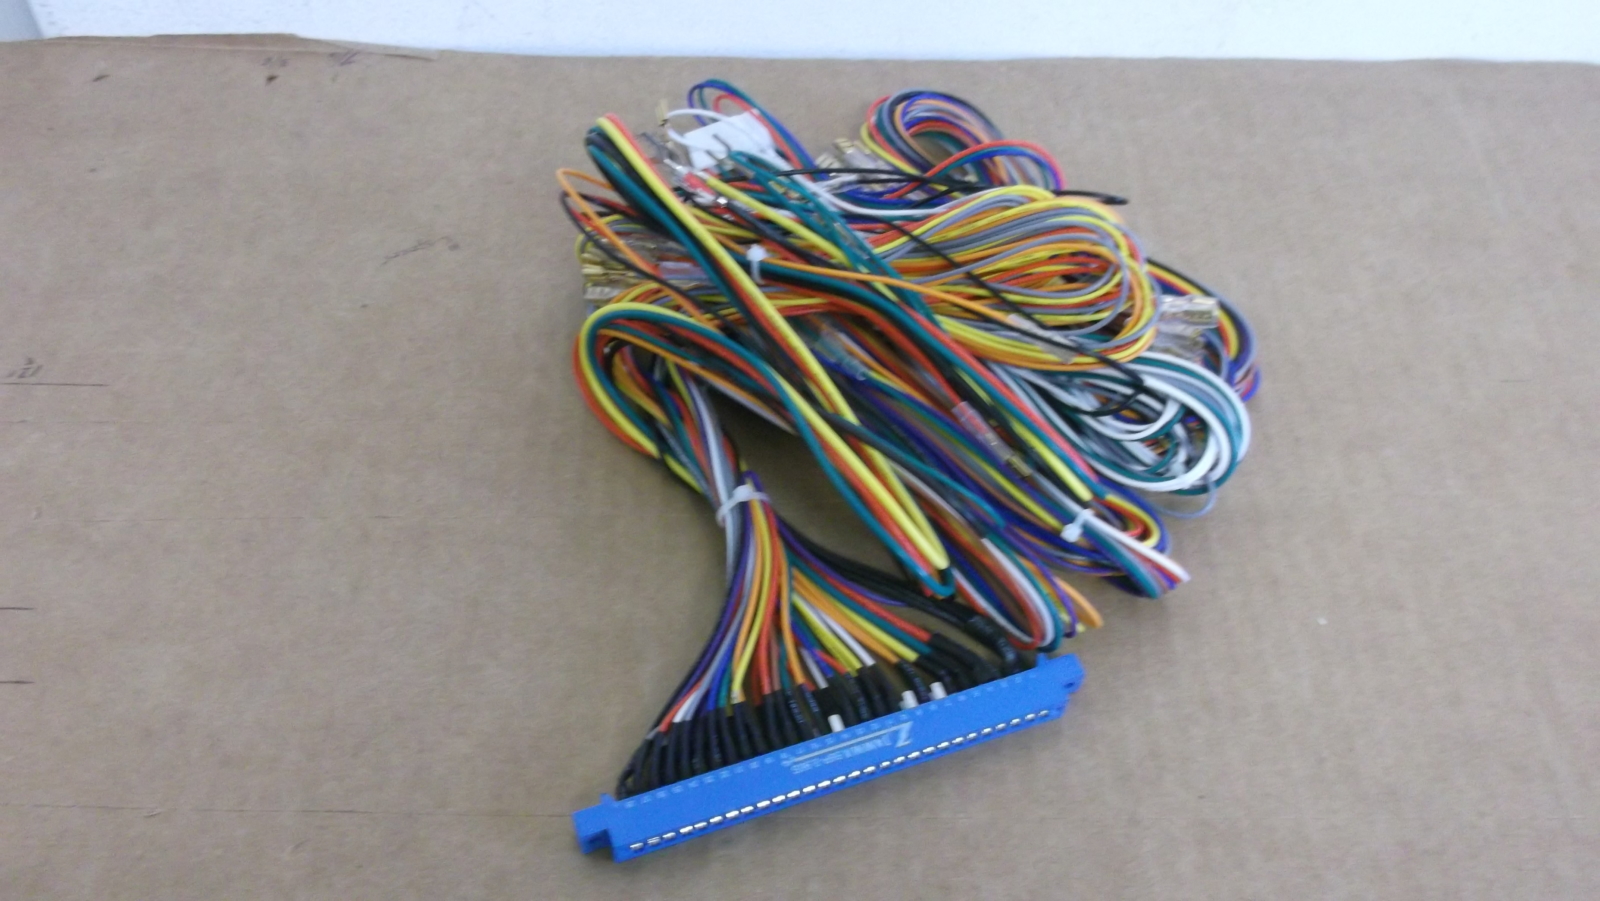 Jamma Harness Cable Set 5.9 FT long 56 Pin edge board 